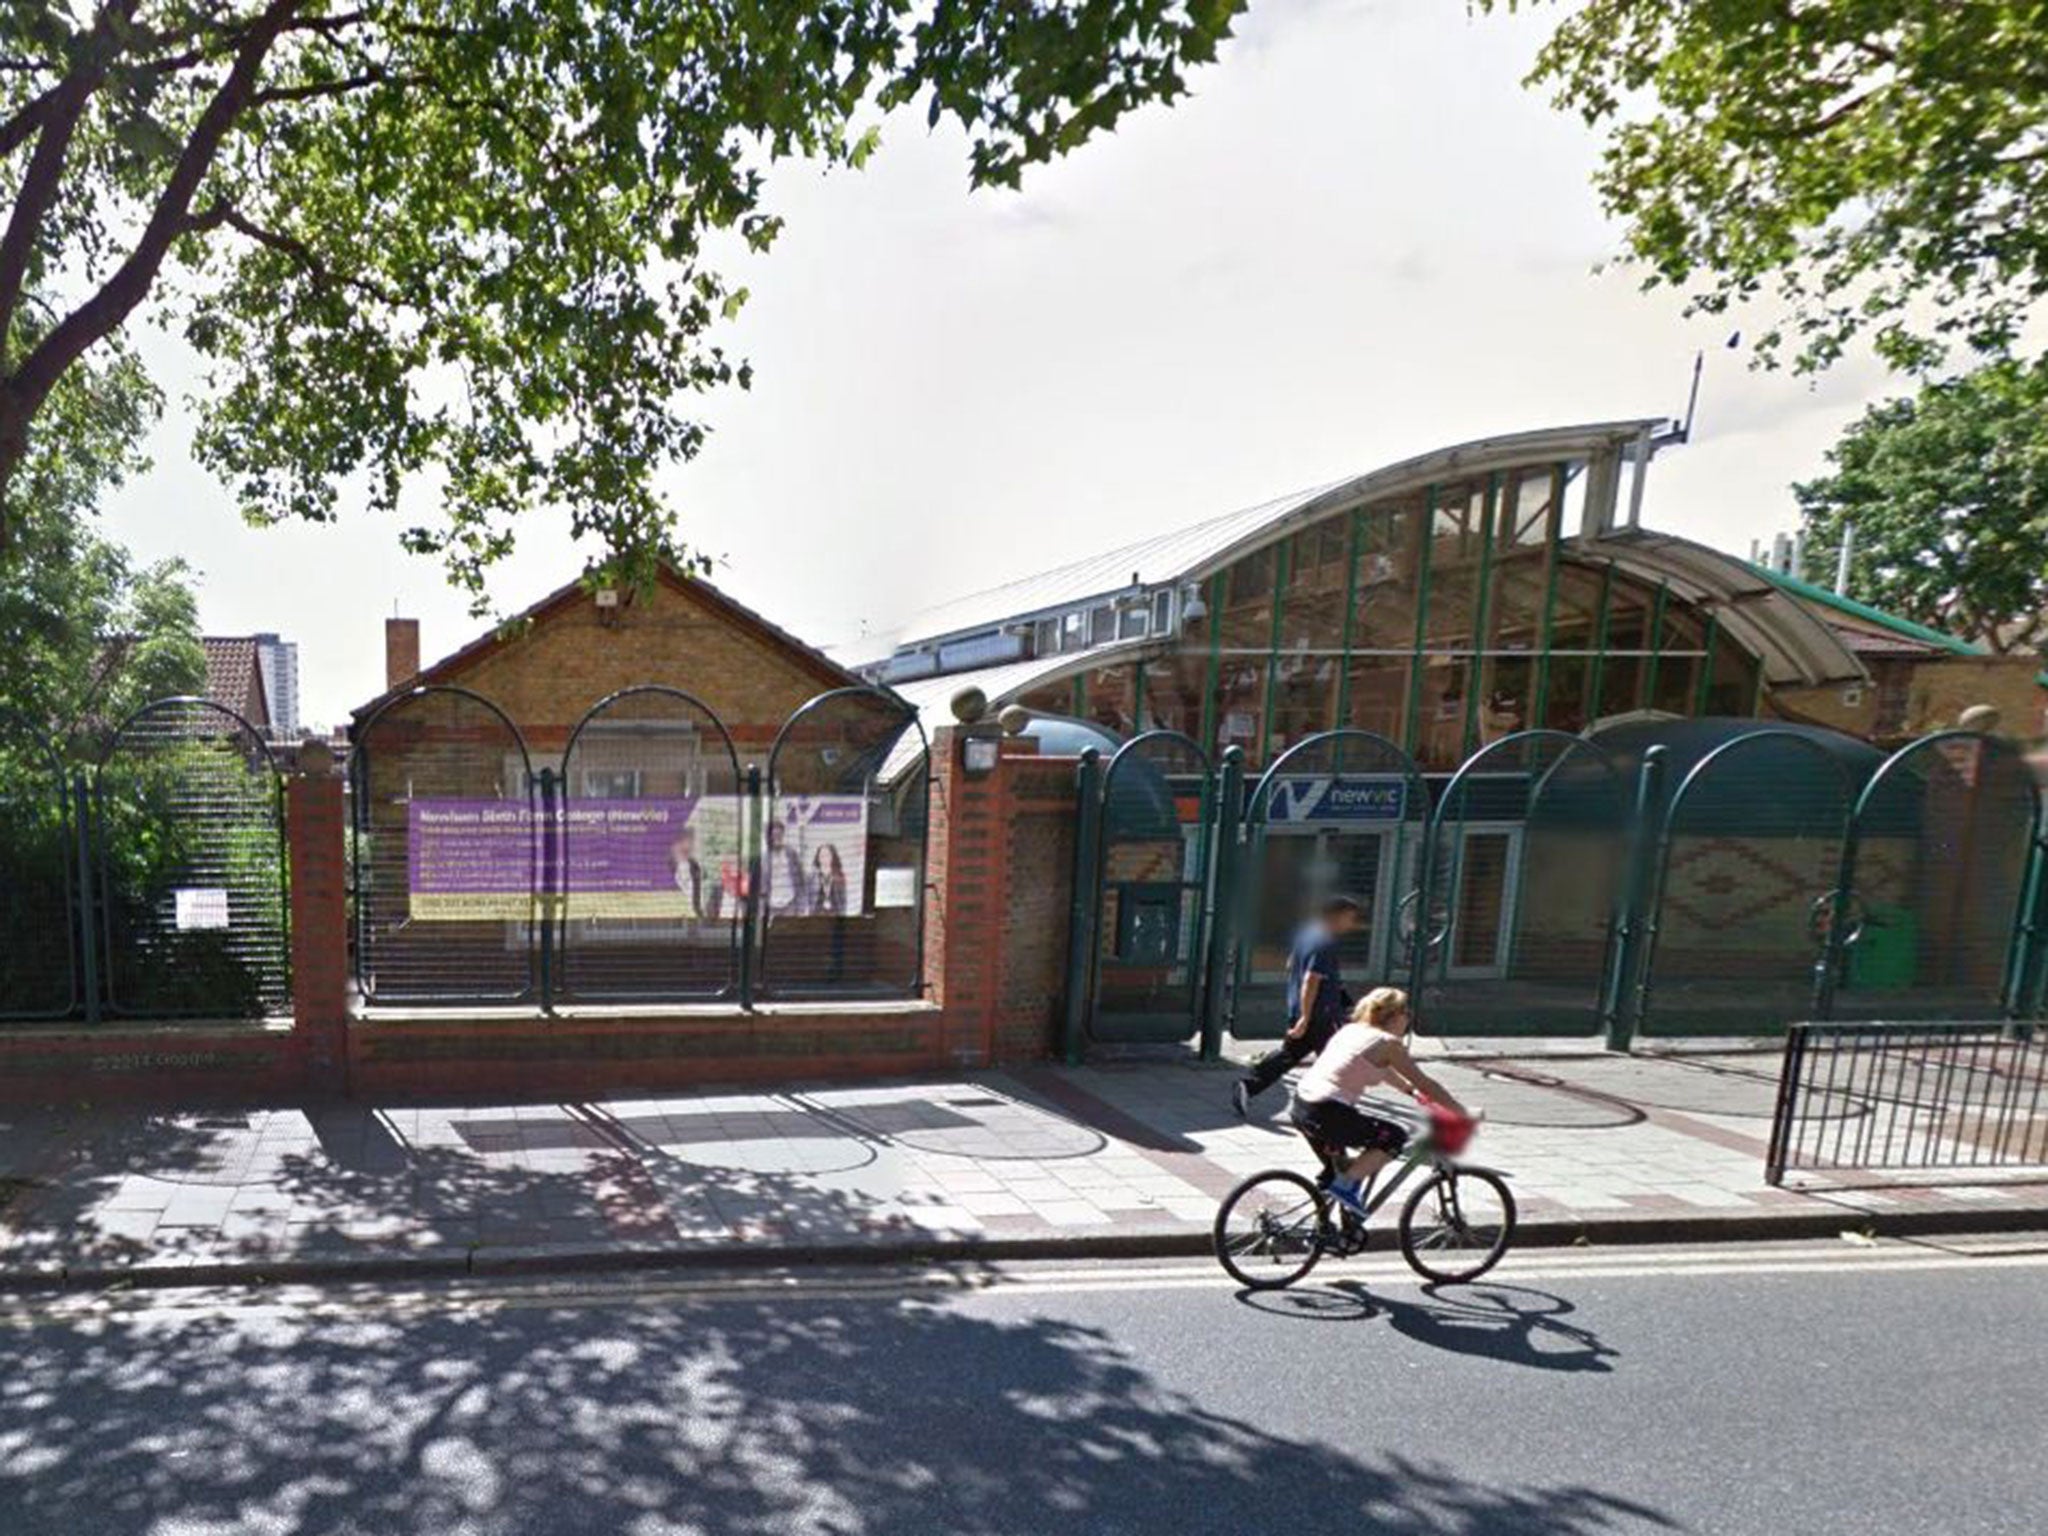 Three Muslim A level students were barred from the premises of the NewVIc college in Newham, east London, following a disagreement with senior staff over the cancellation of a discussion about anti-Muslim attitudes in society 